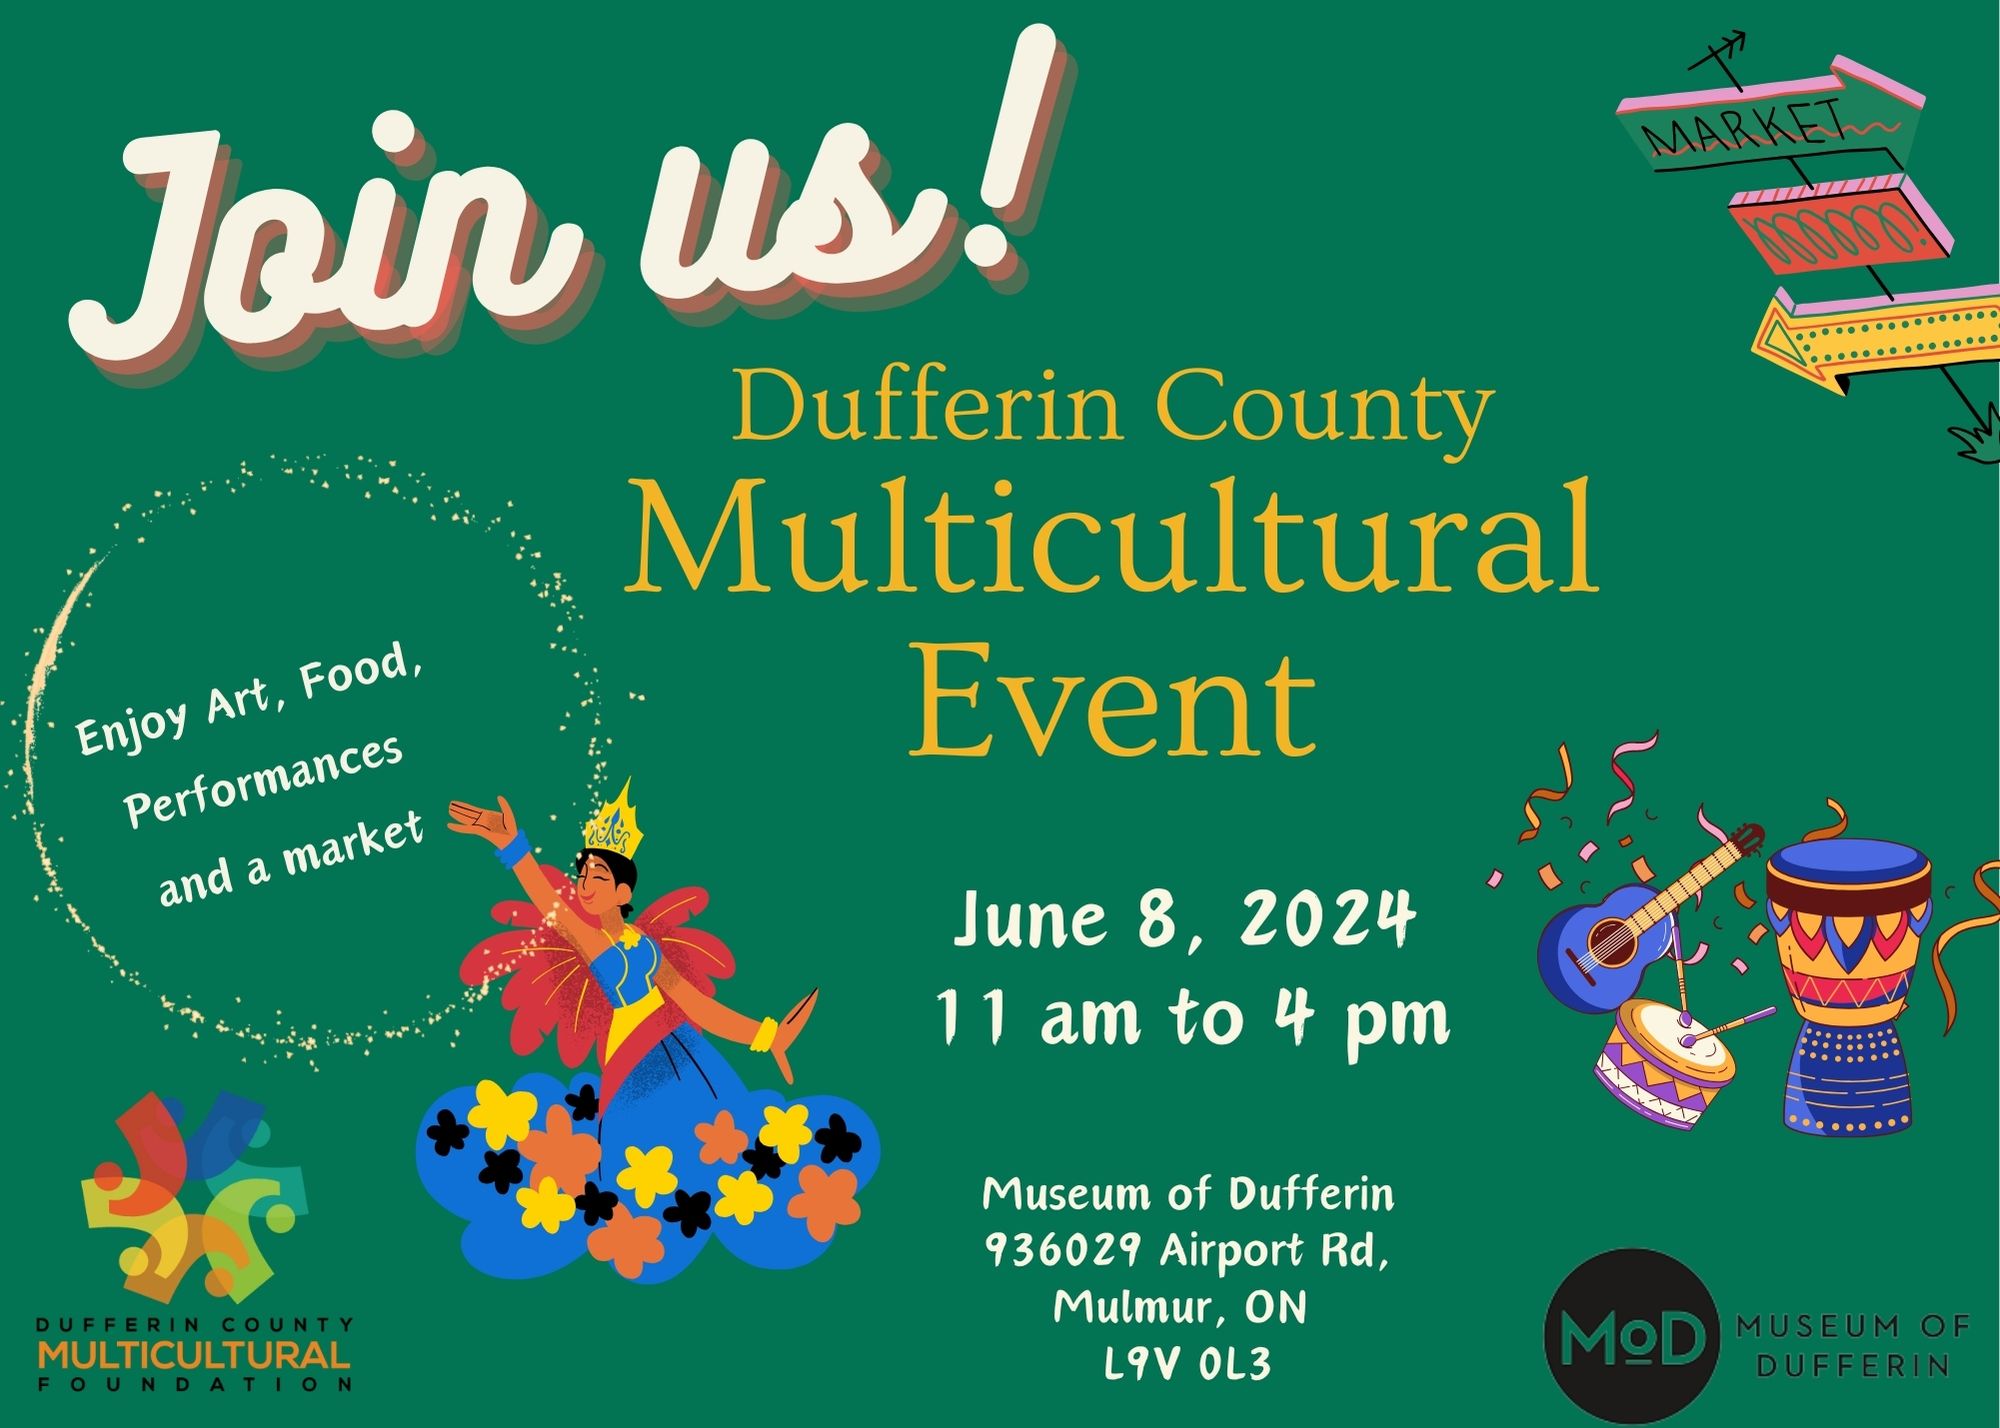 Ad for the Dufferin County Multicultural Event